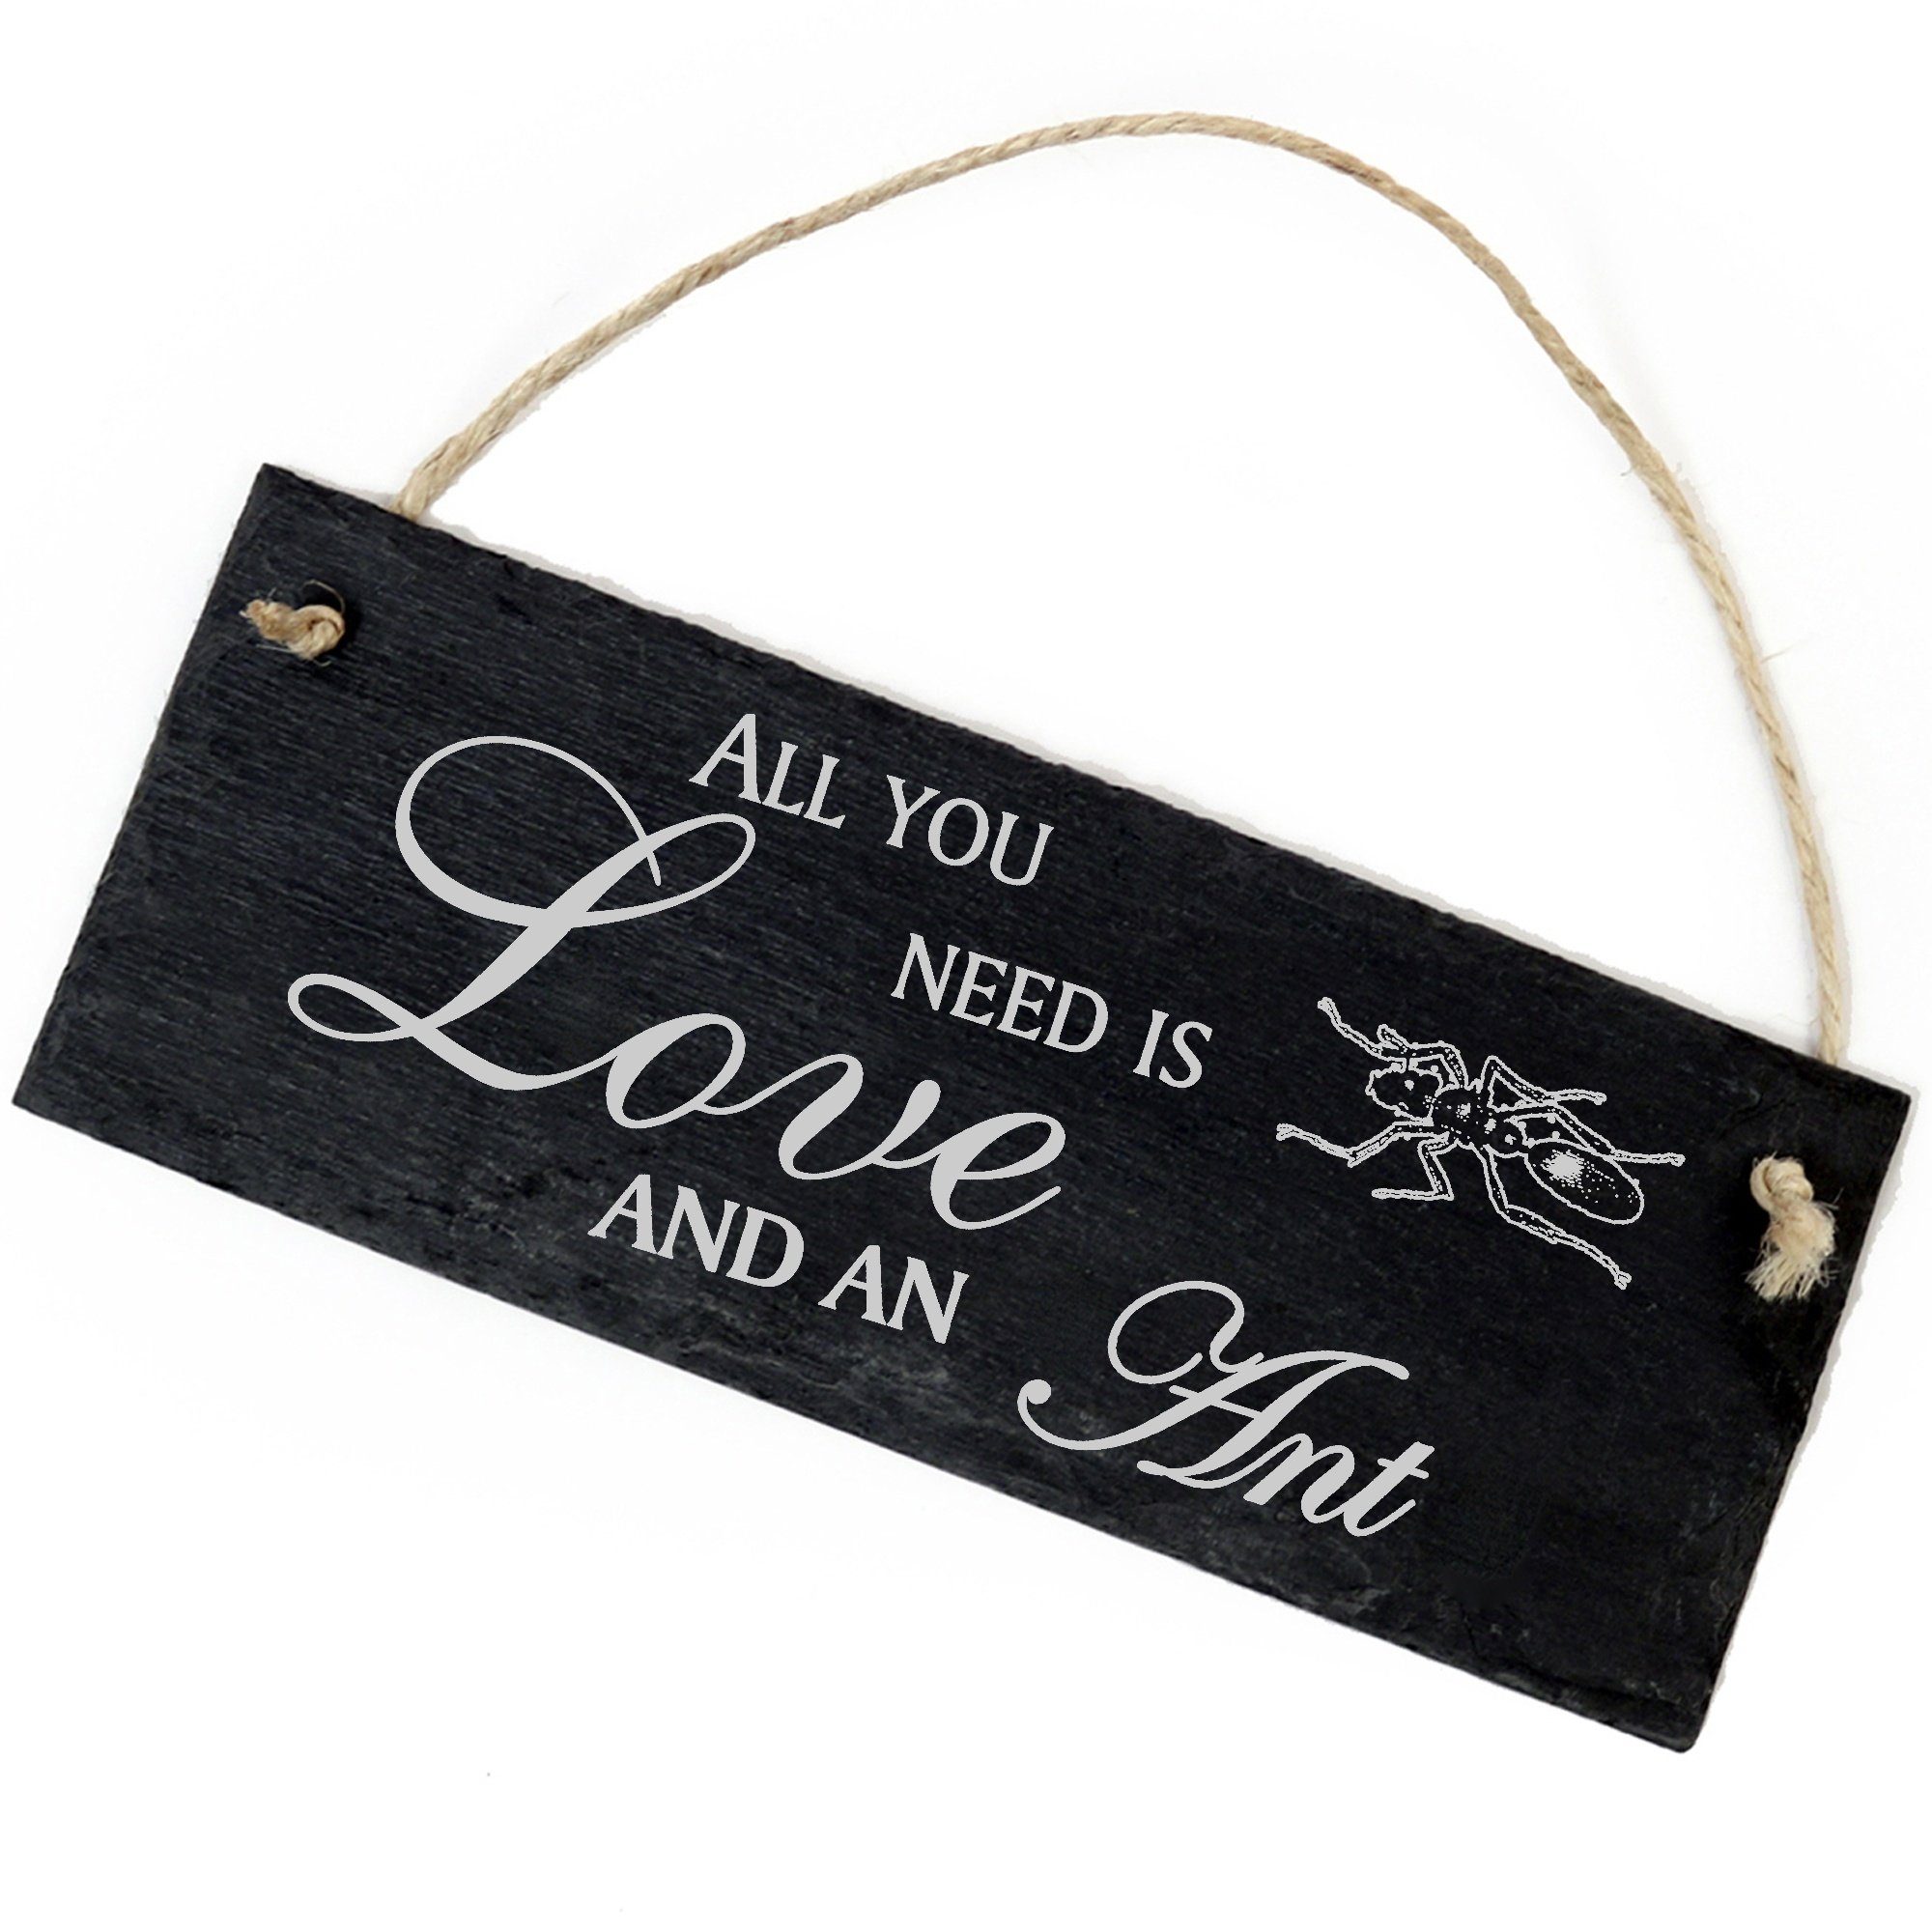 Dekolando Hängedekoration dunkle Ameise 22x8cm All you need is Love and an Ant